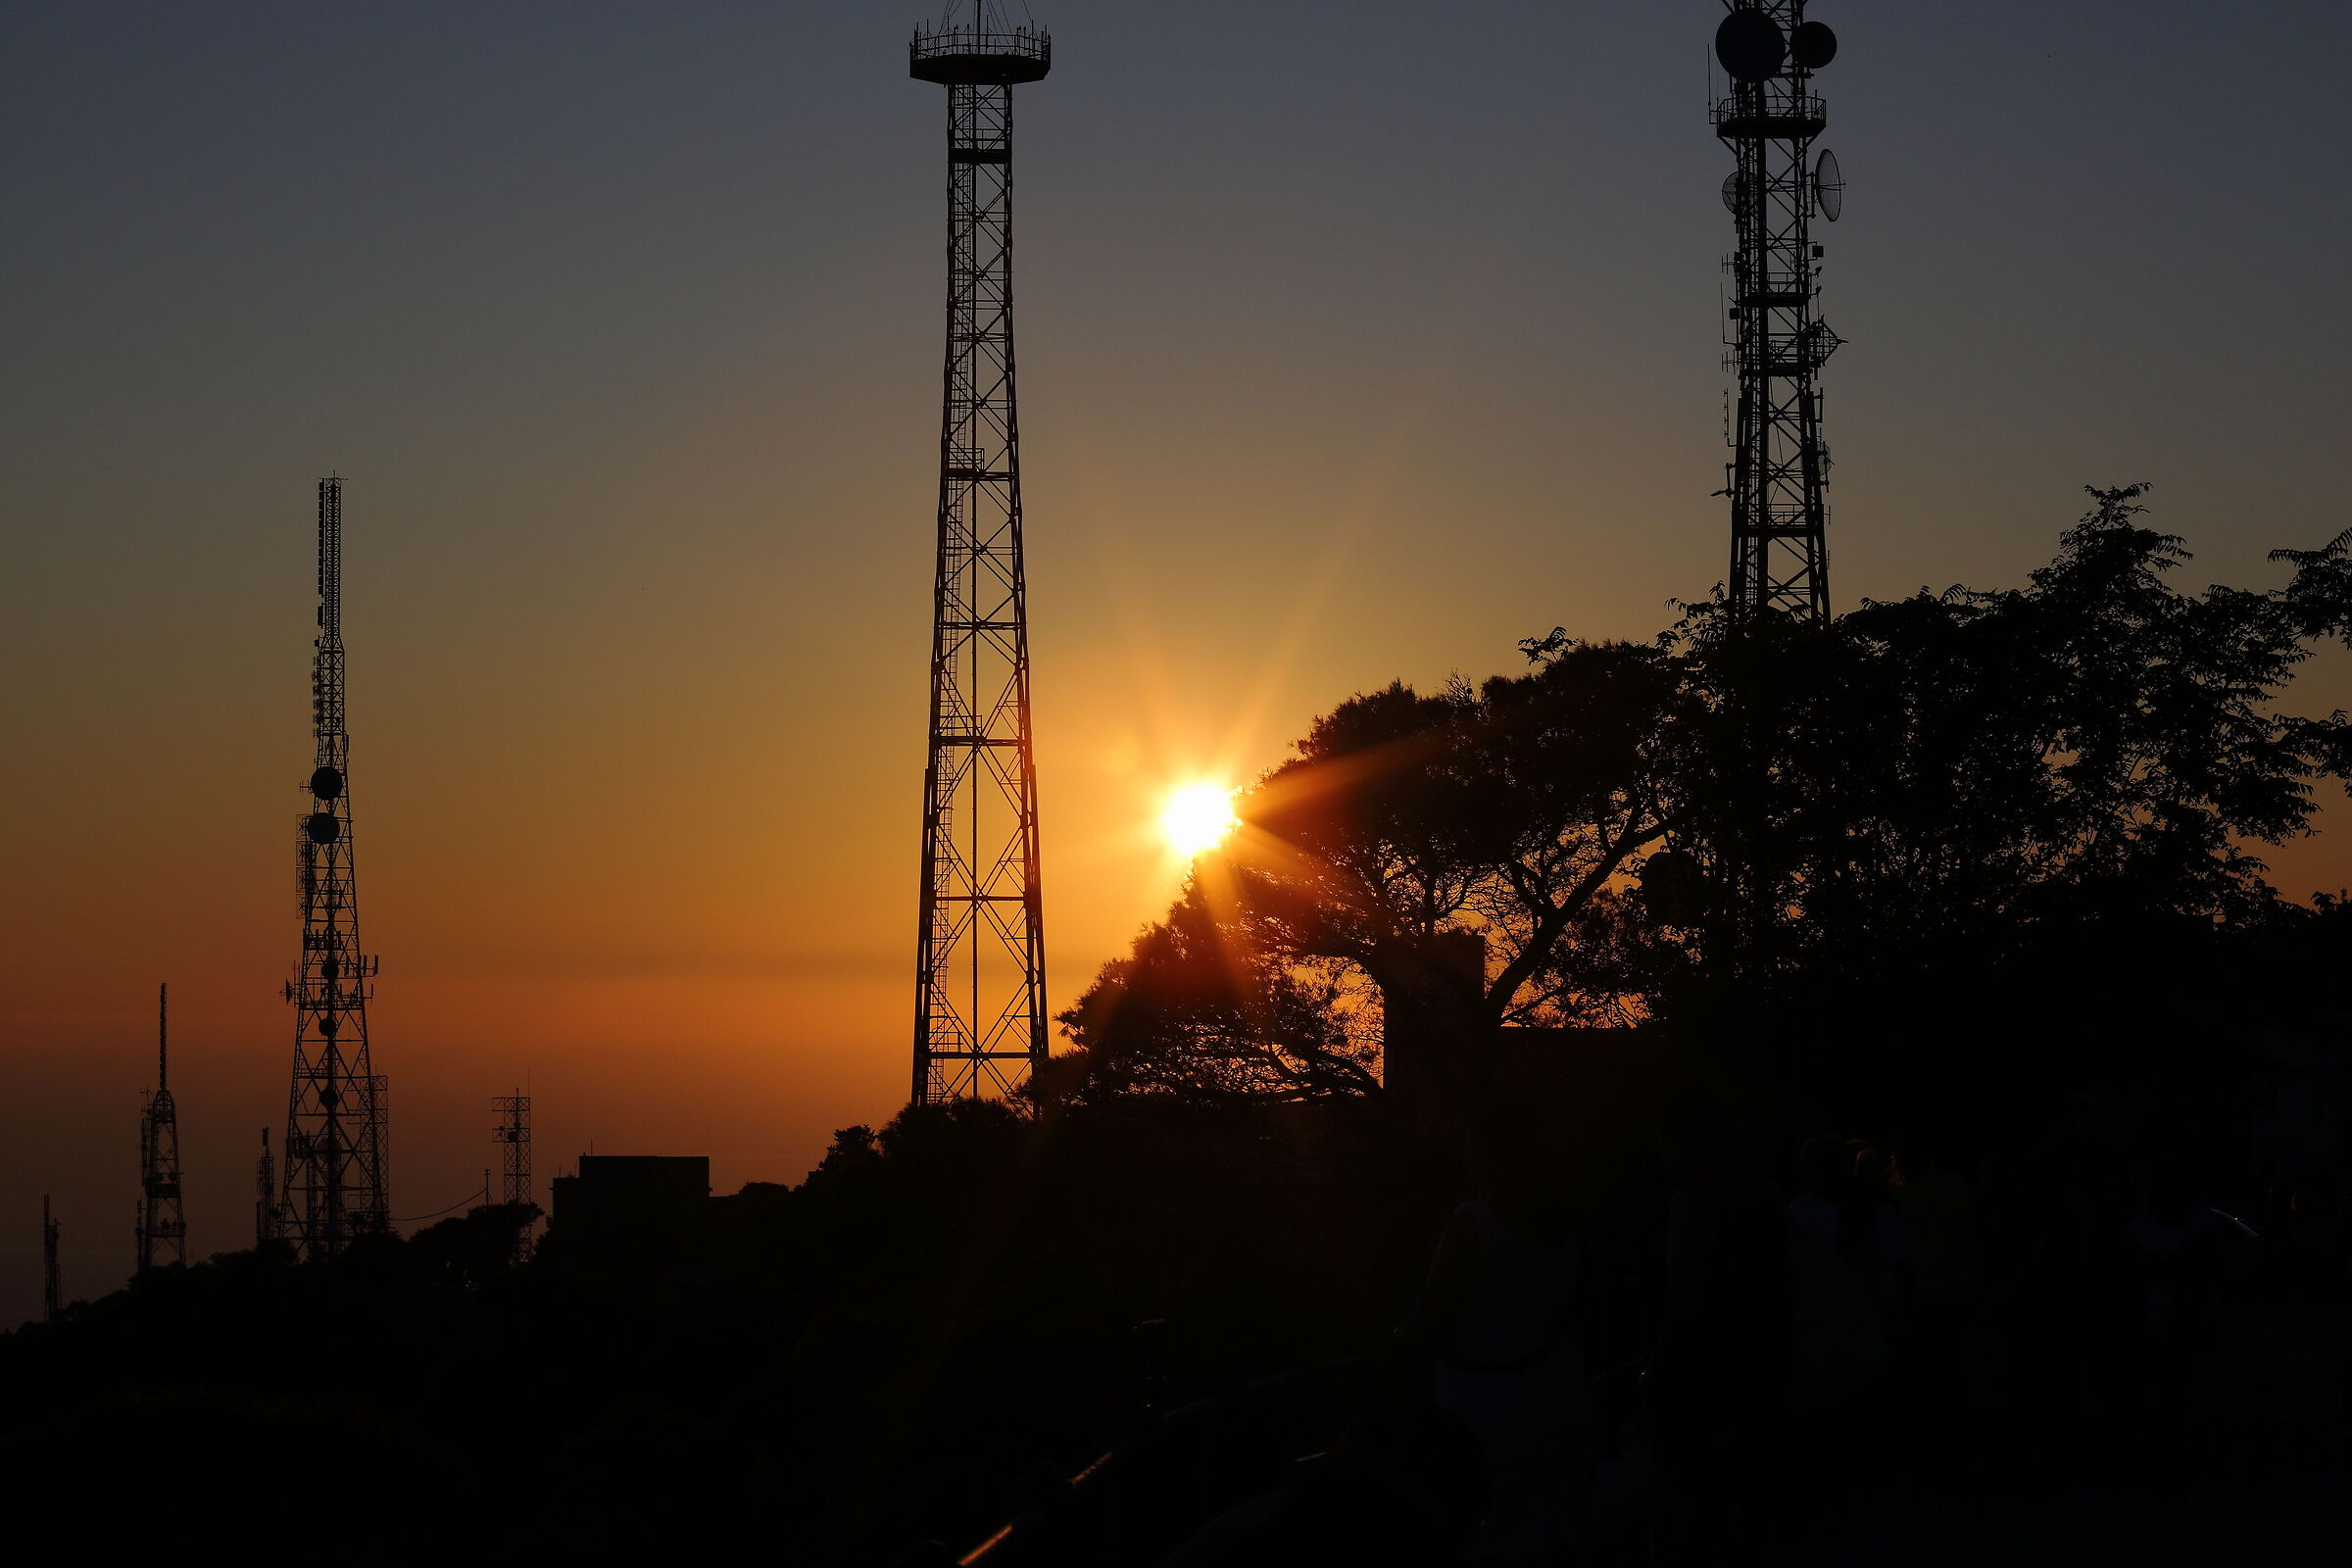 The sunset on radio, TV and websites...